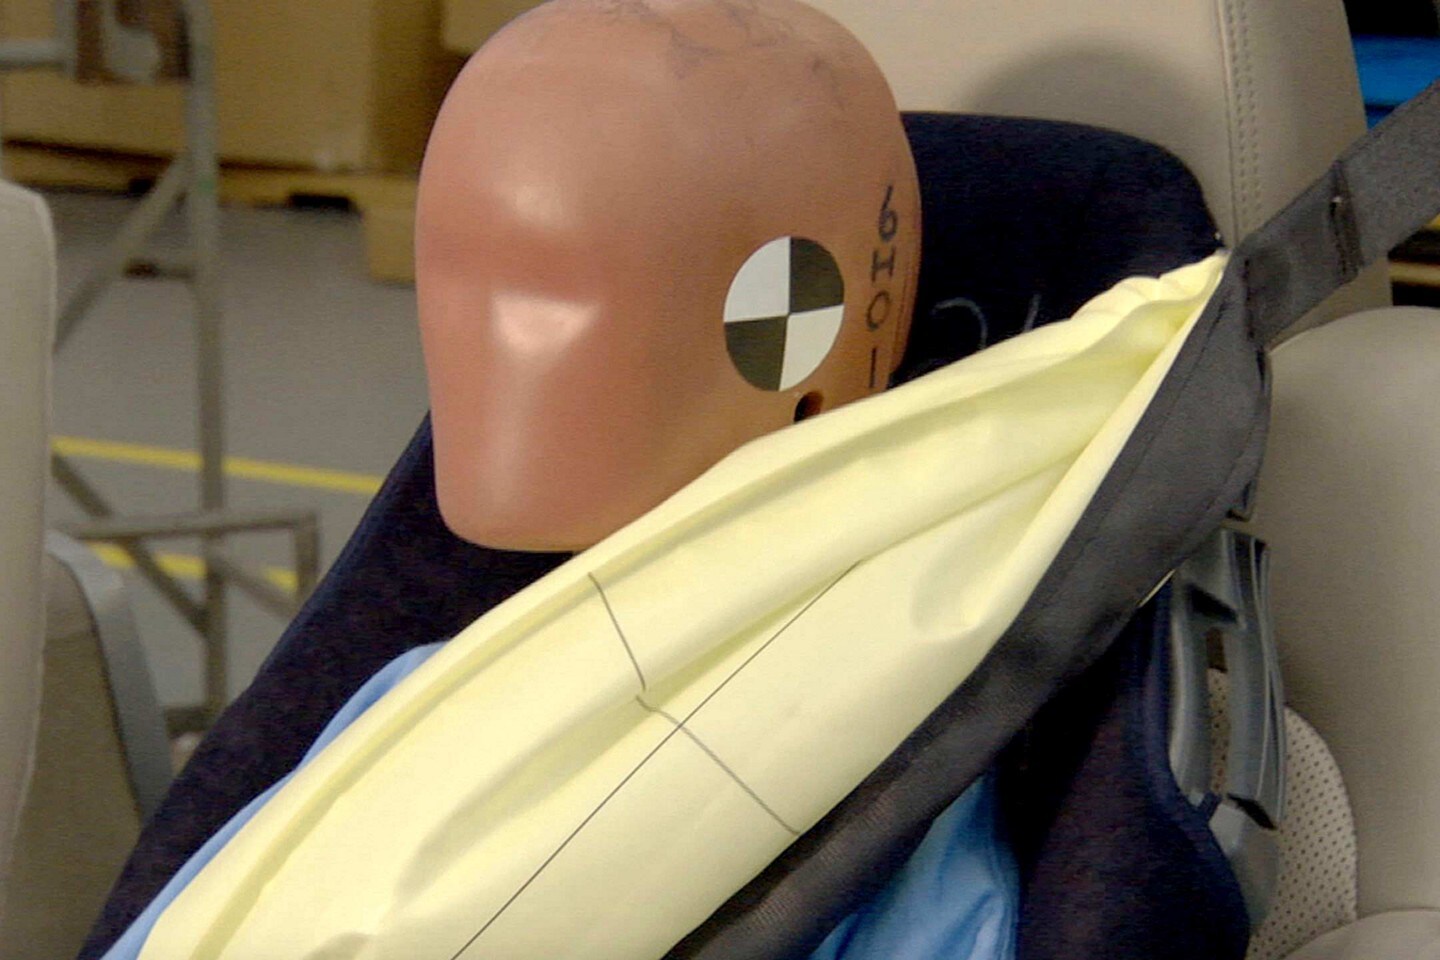 Testing dummy with an activated safety belt